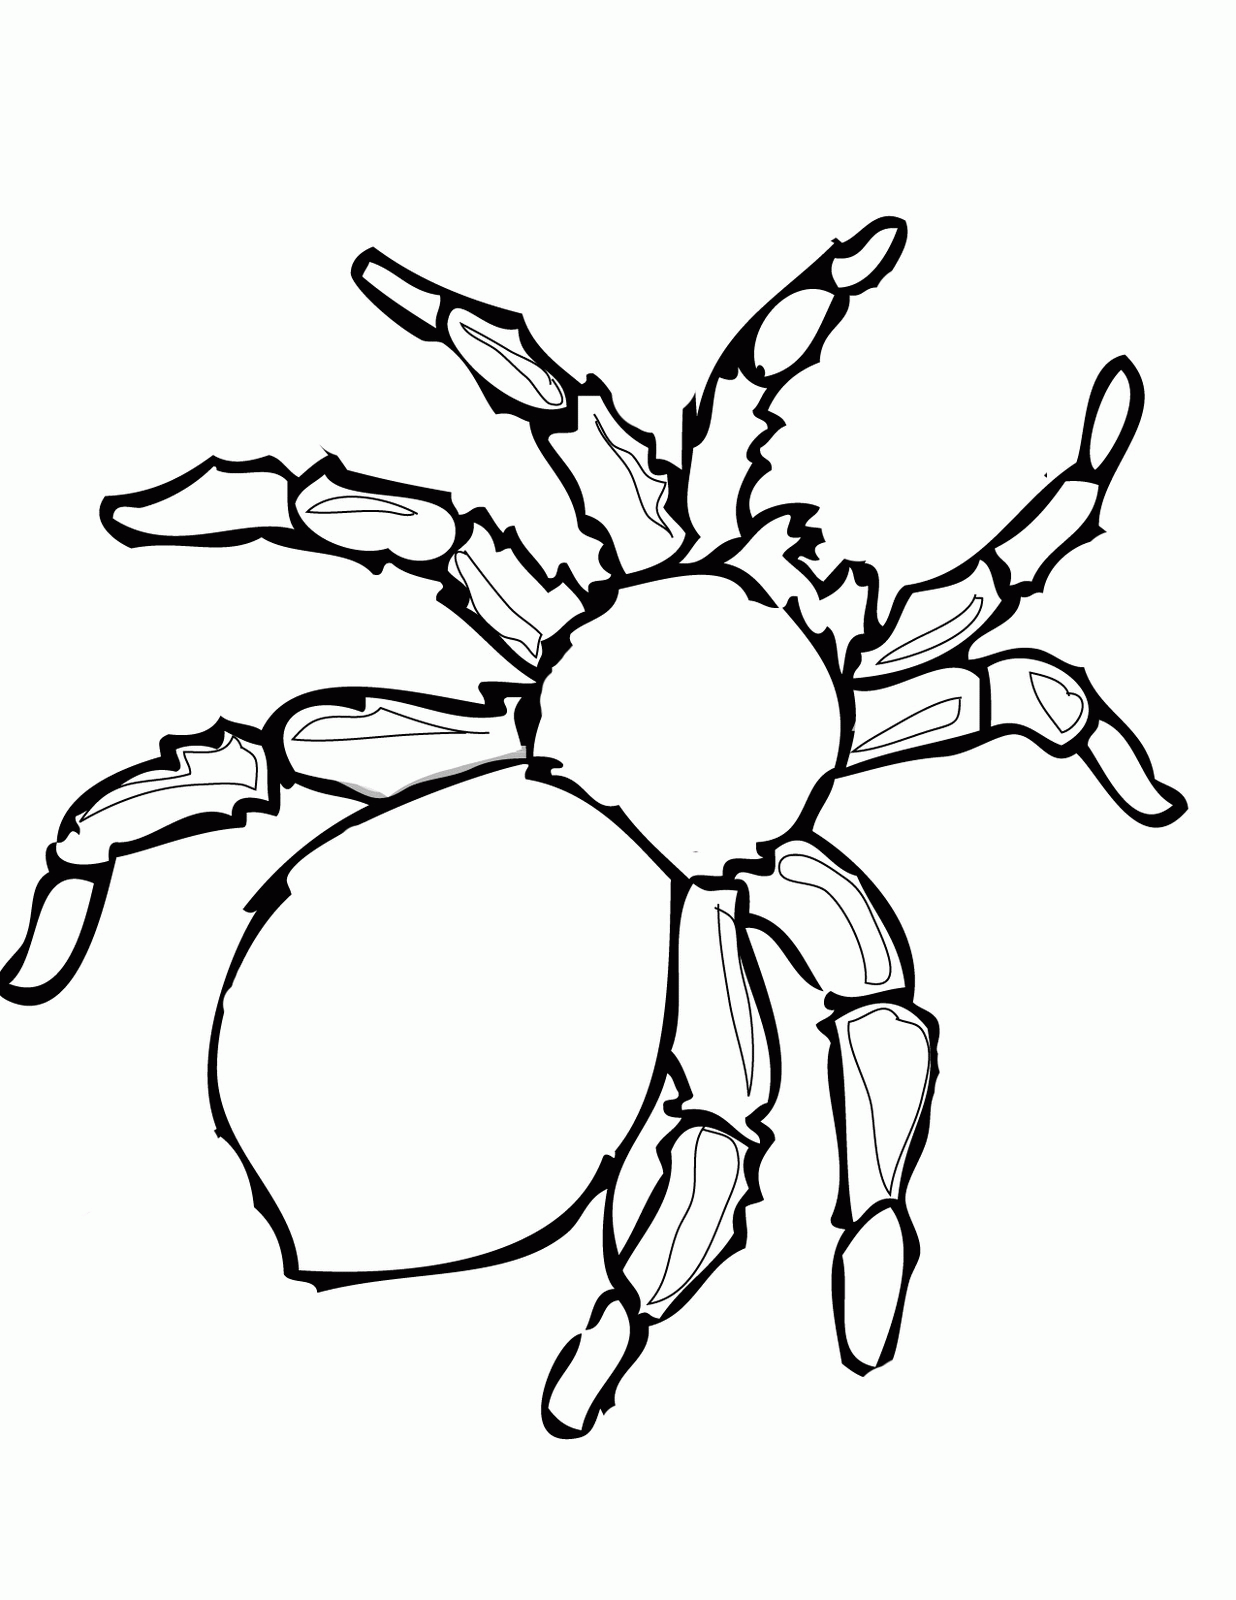 Spider Coloring Pages Printable - SheetalColor.com